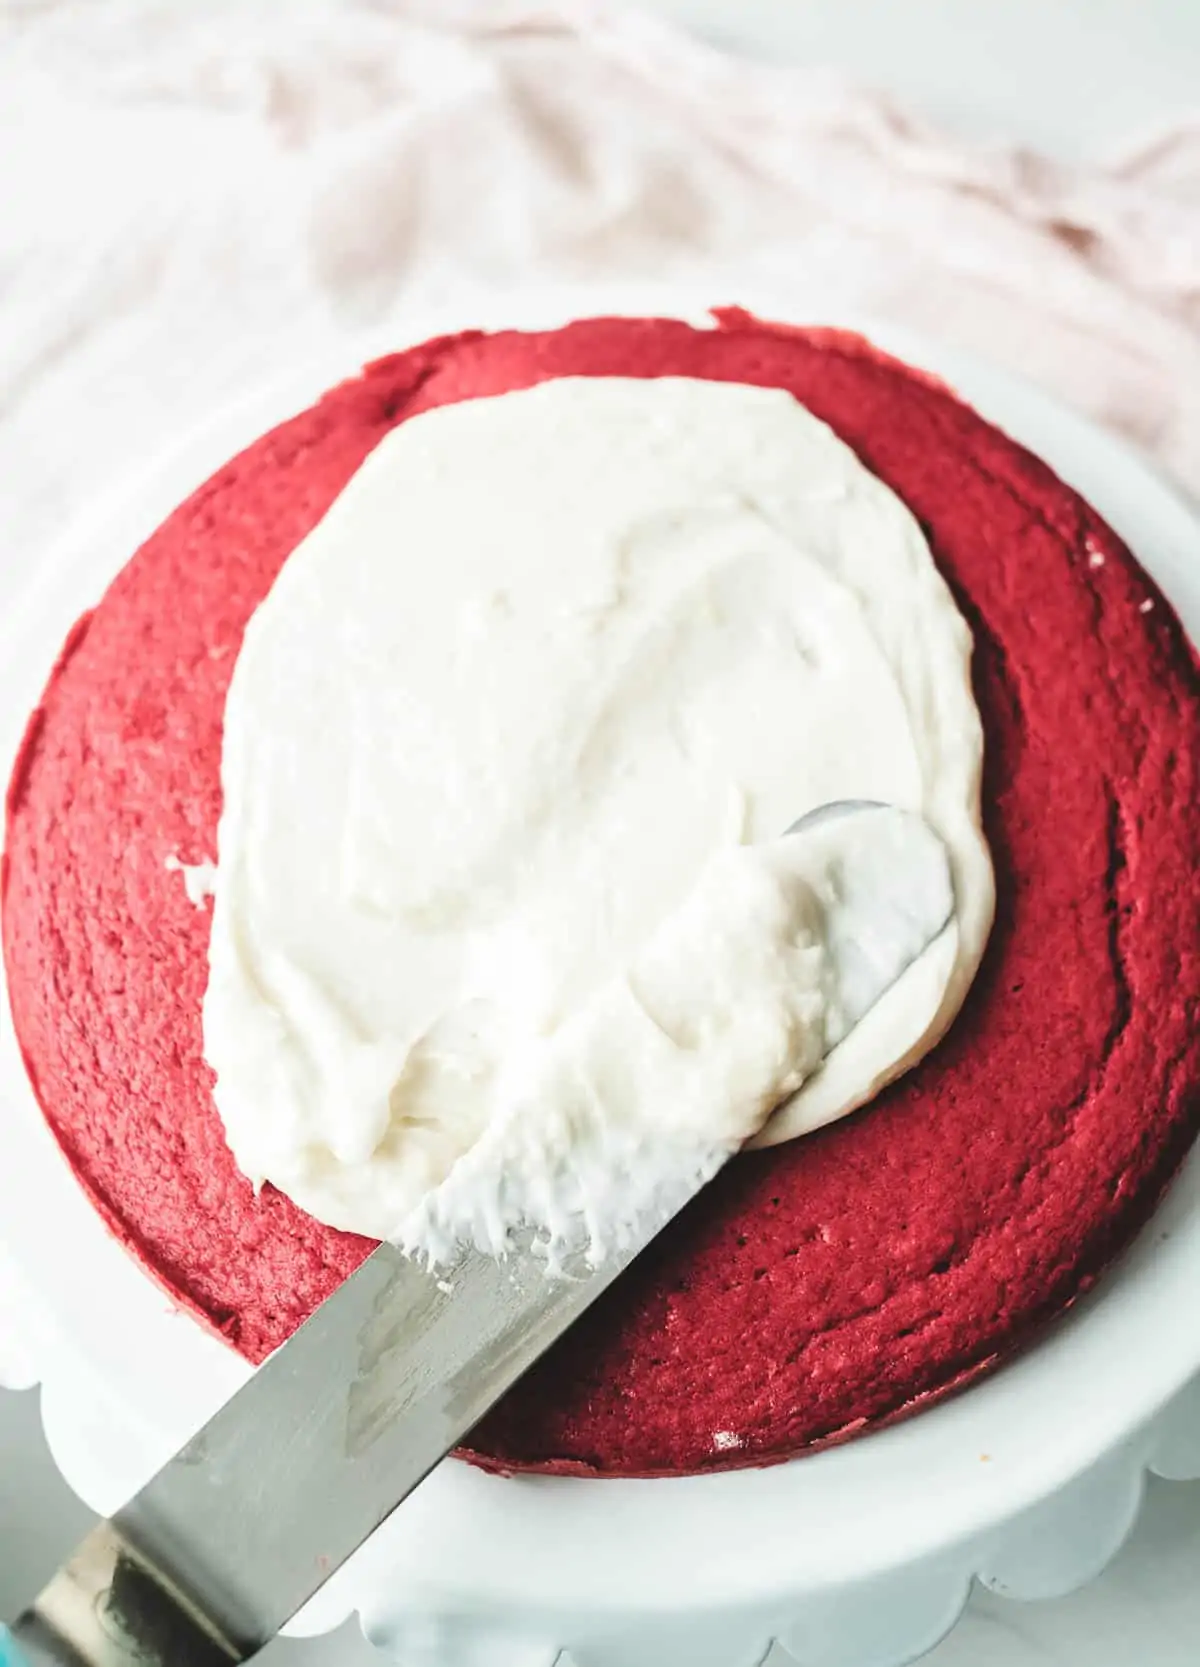 Cream cheese frosting on top of a layer of red cake.
